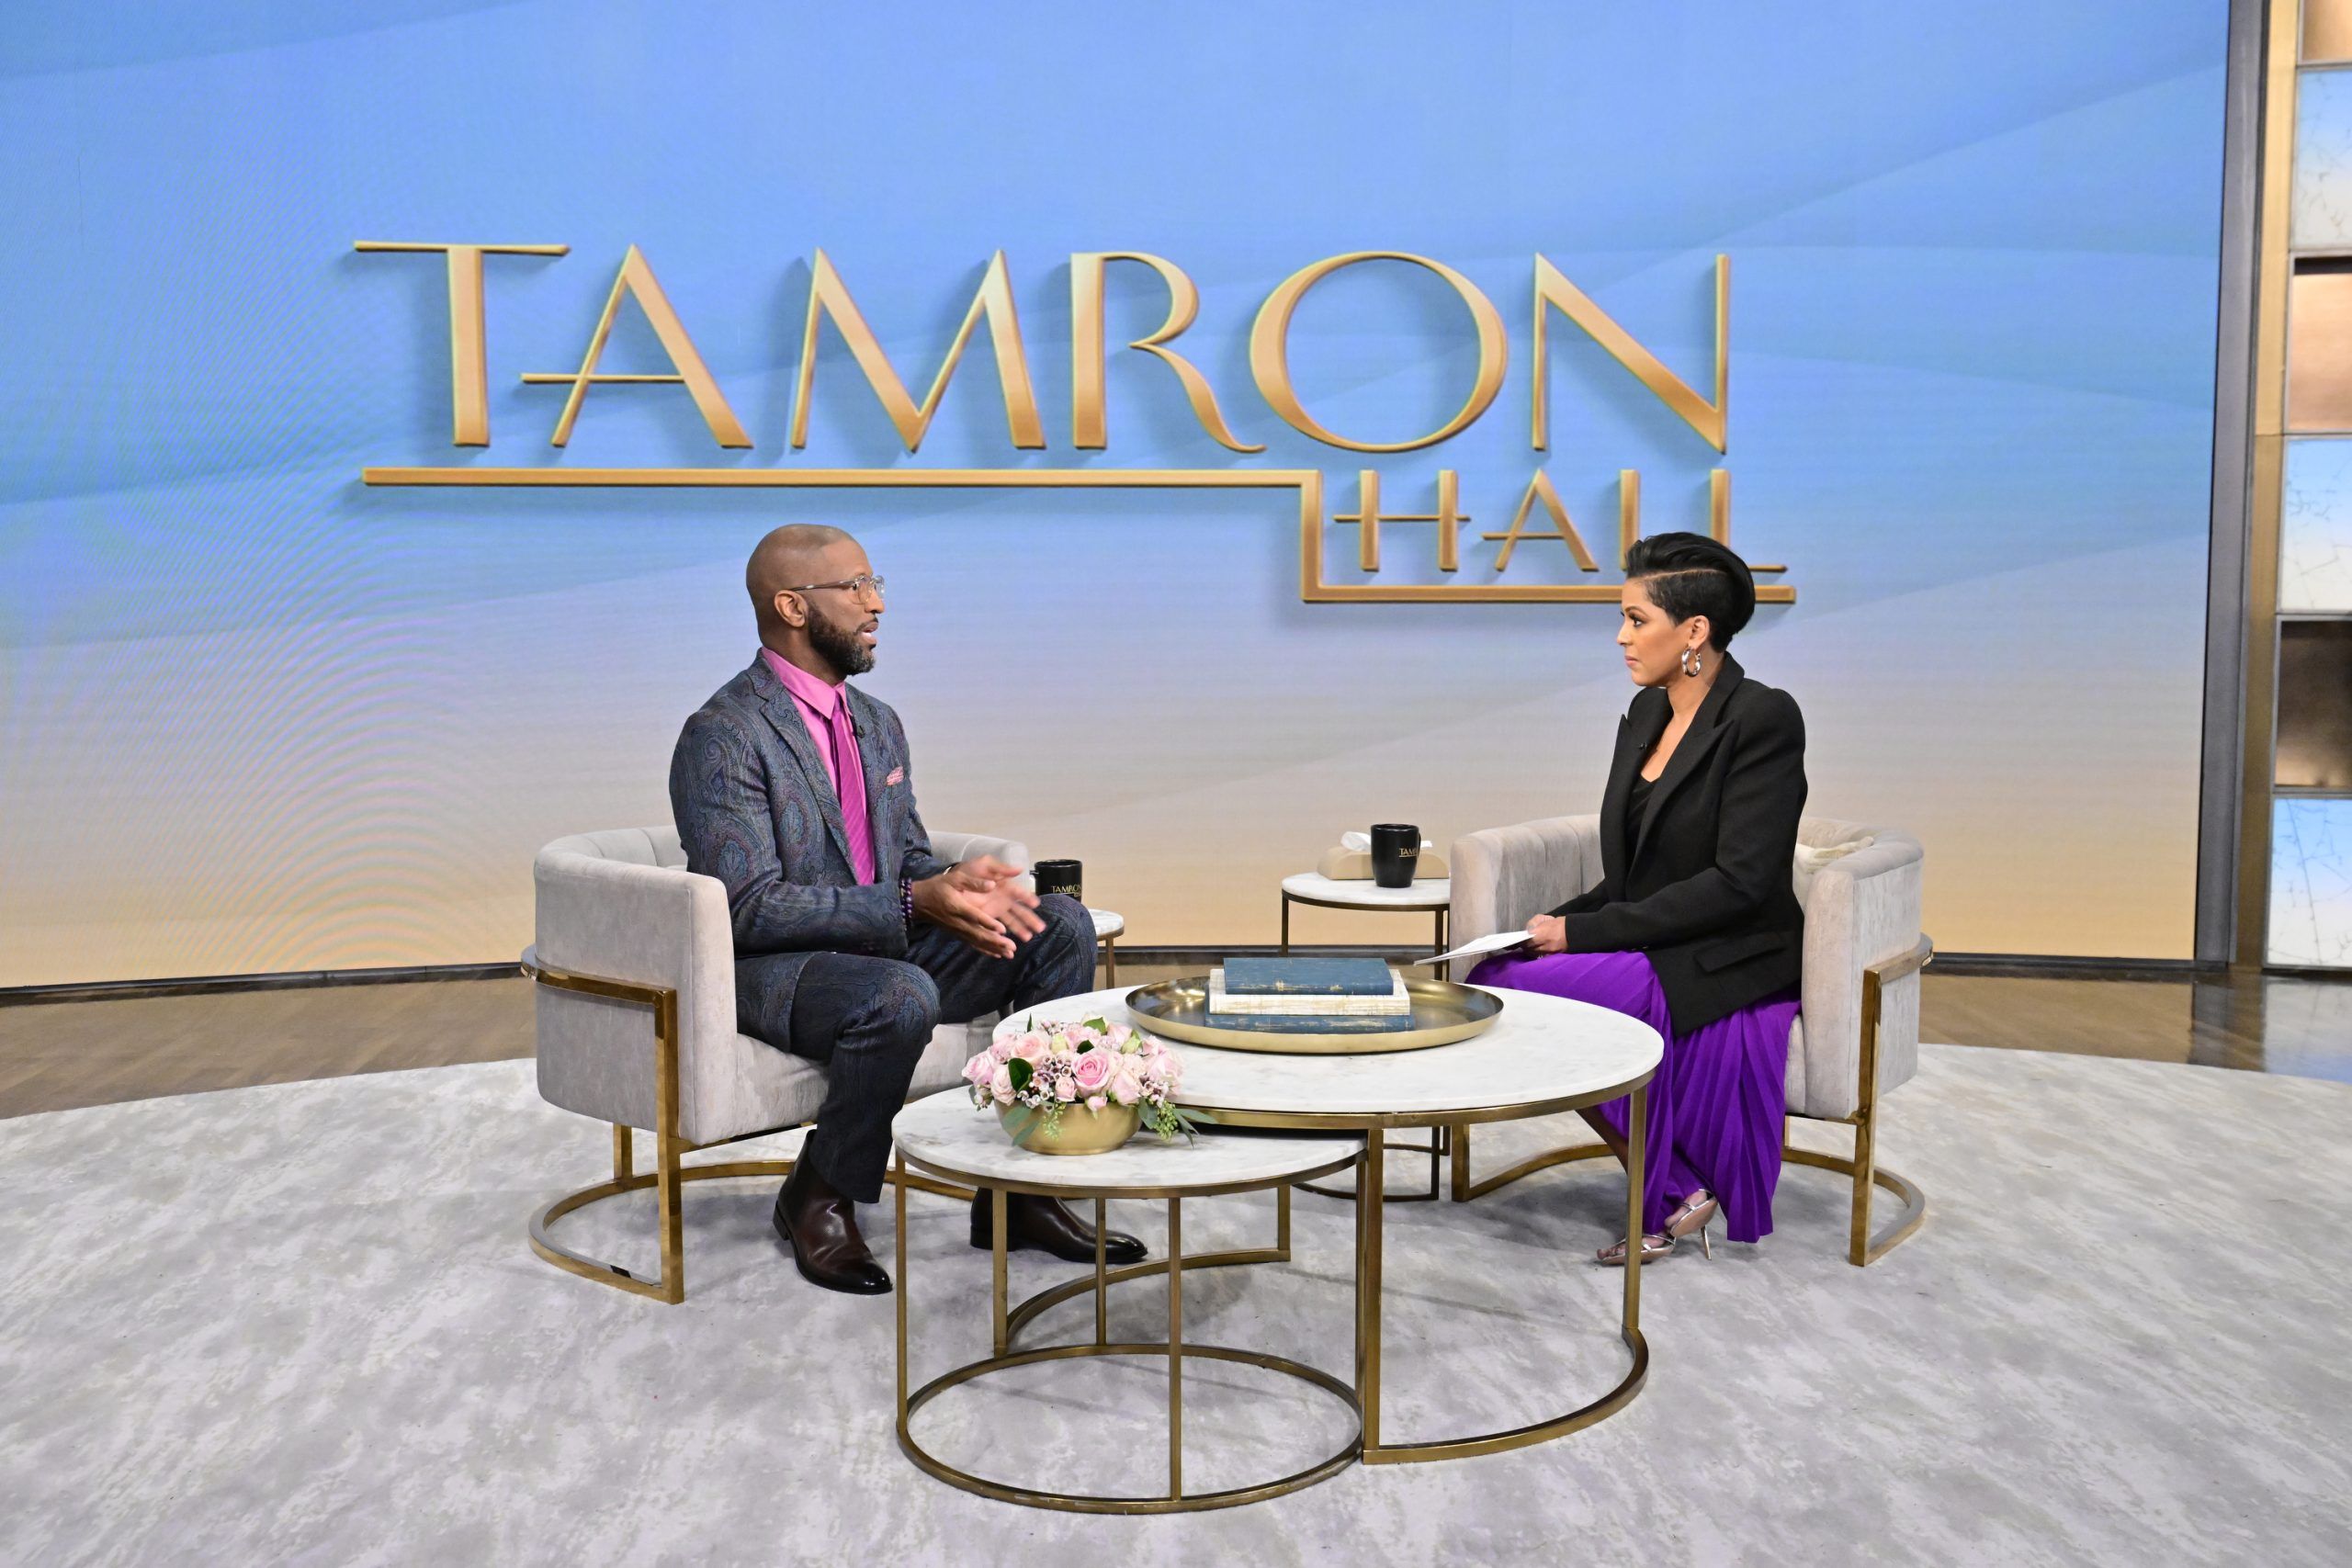 Radio Personality Rickey Smiley Opens Up About Son’s Passing on “Tamron Hall”